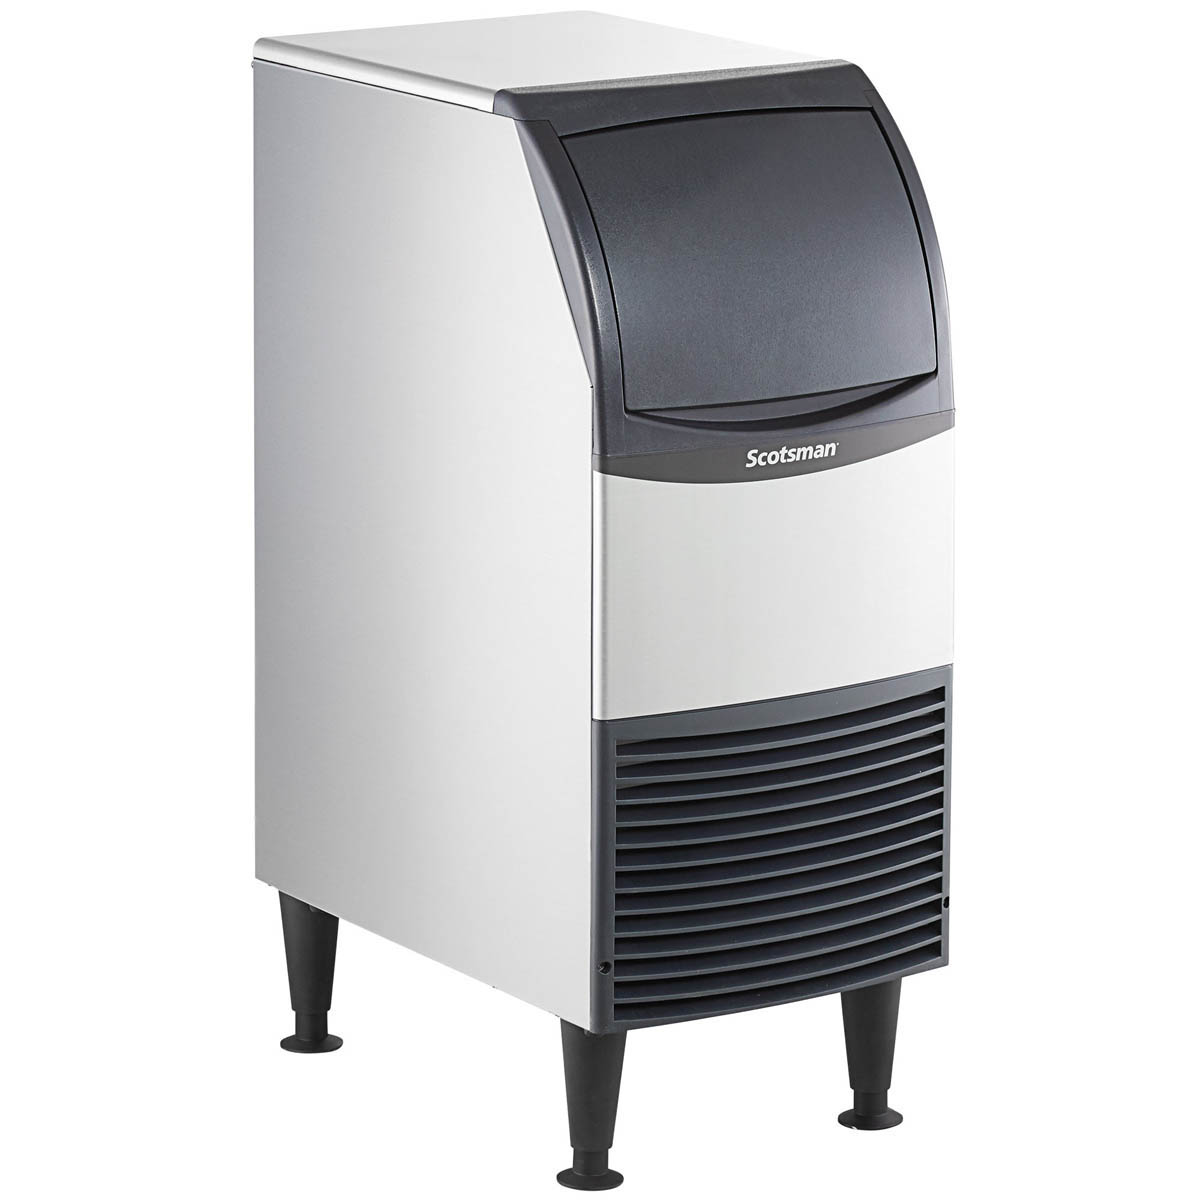 Scotsman UN1215A-1 Provides Soft and Slow Melting For Your Service and Displays, Chef's Deal